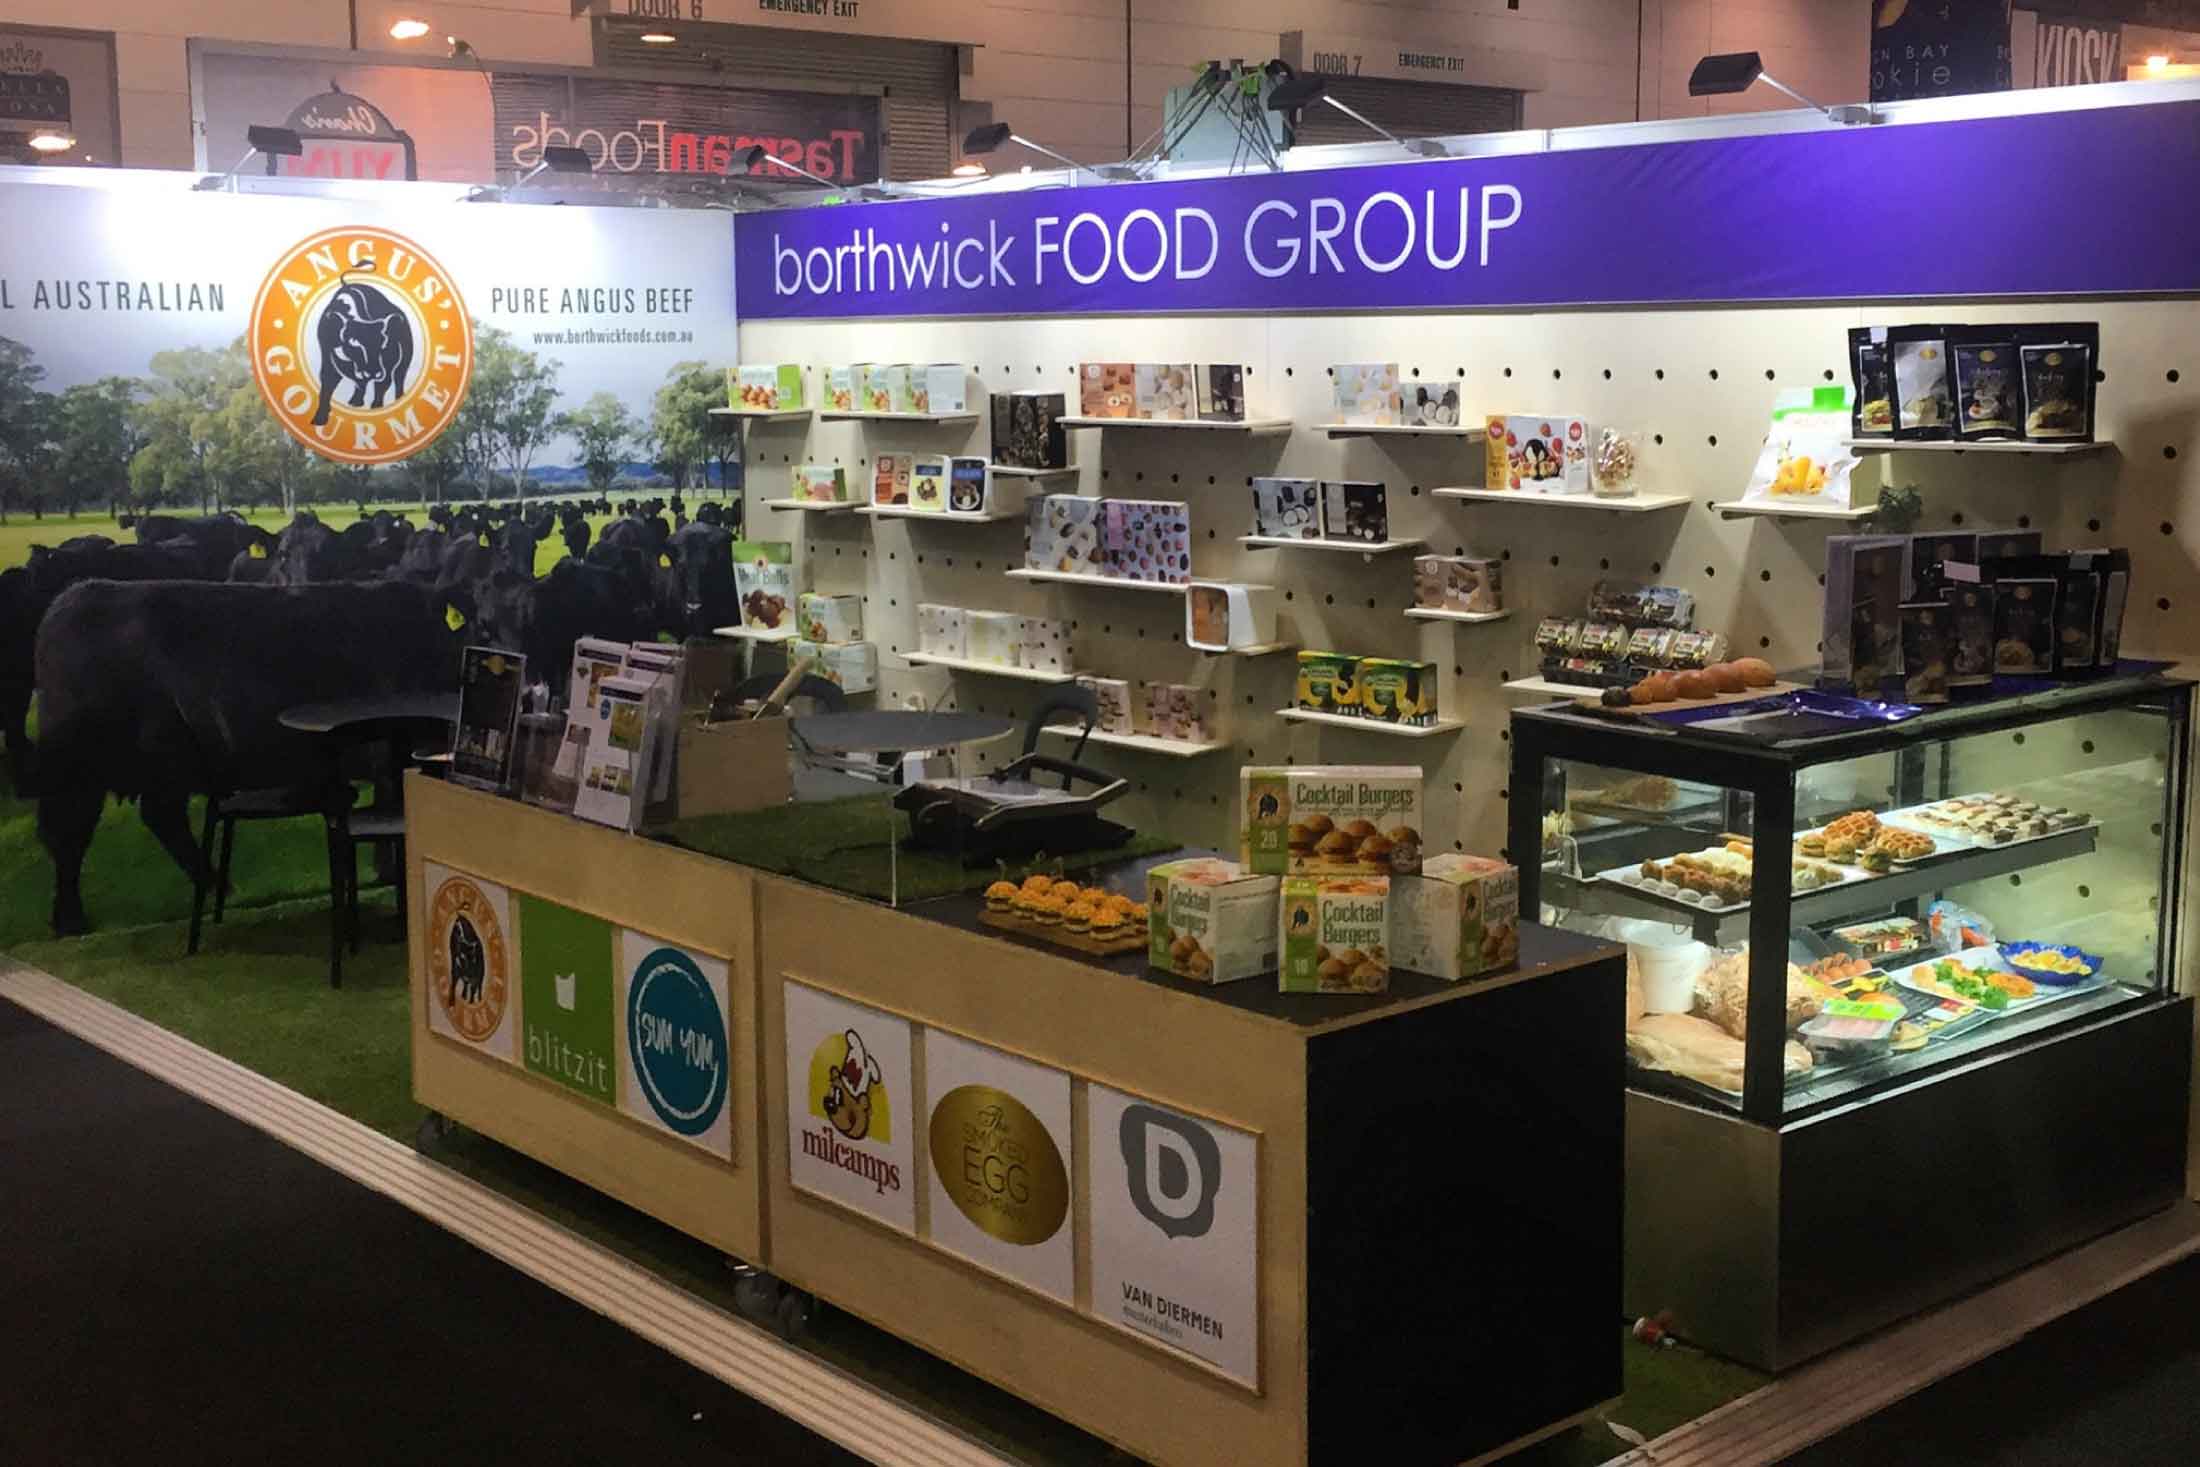 Borthwick foods offer free samples on their stand